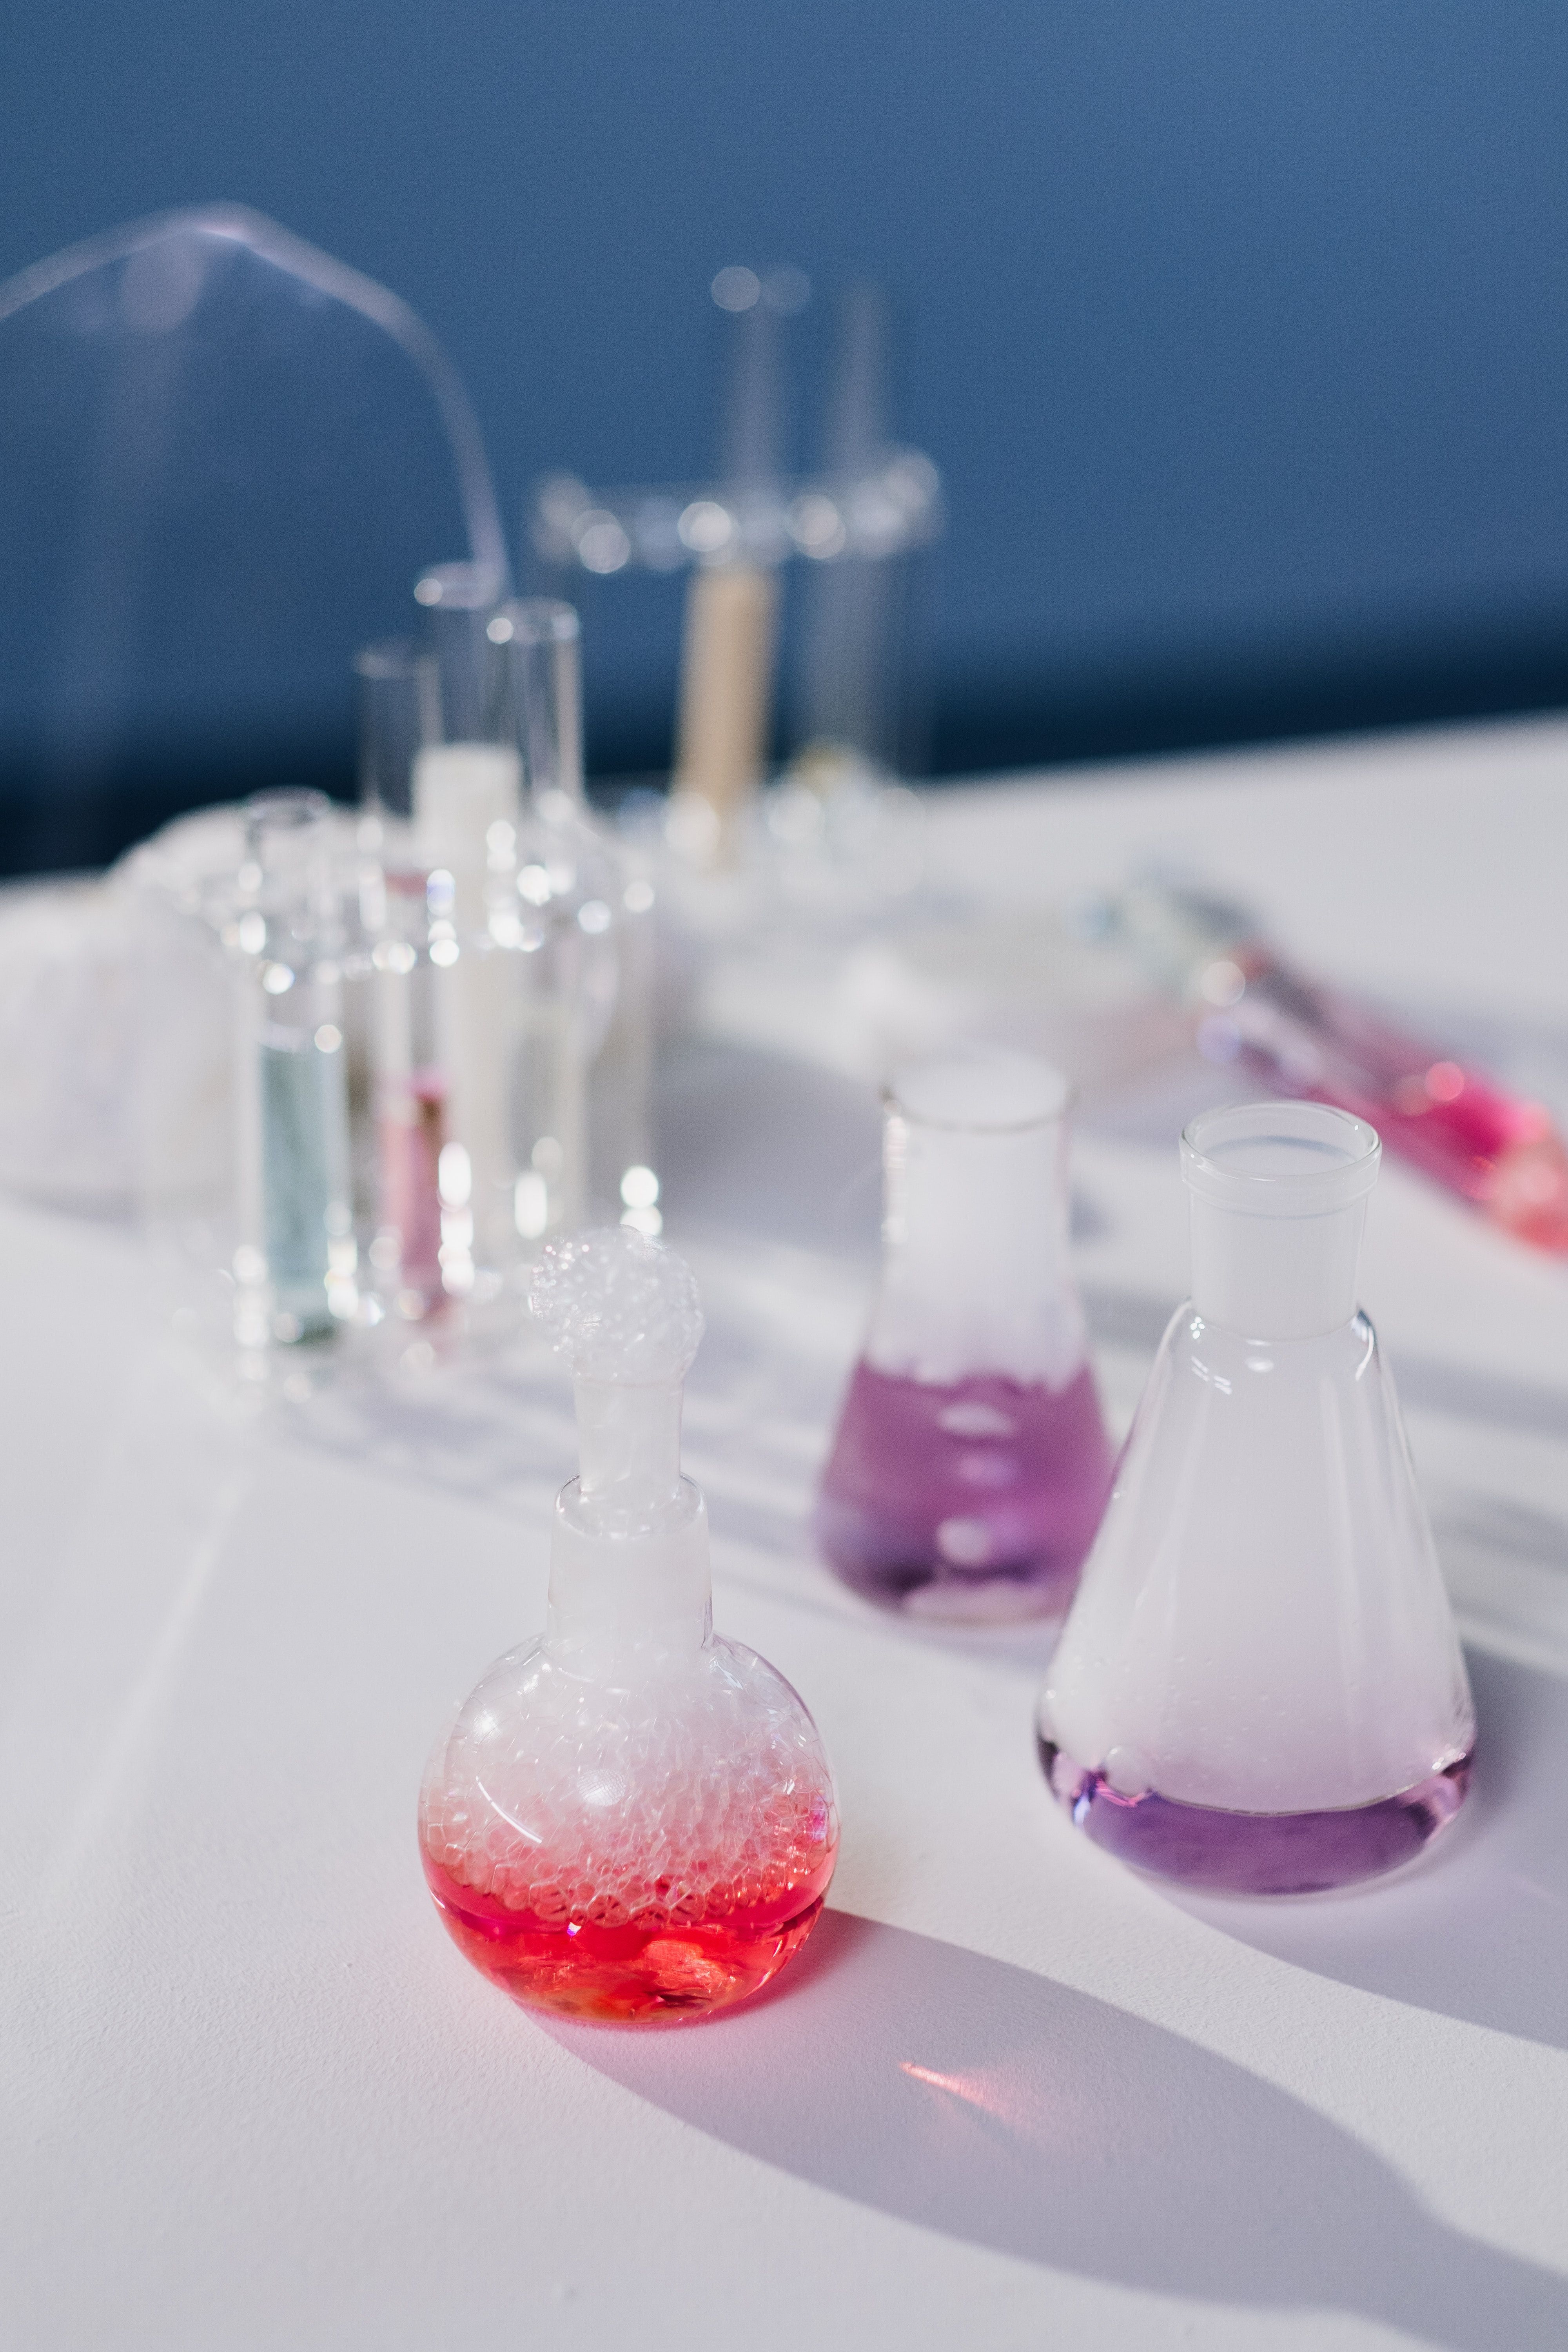 A close up of a few beakers with red liquid in one and purple liquid in another. - Chemistry